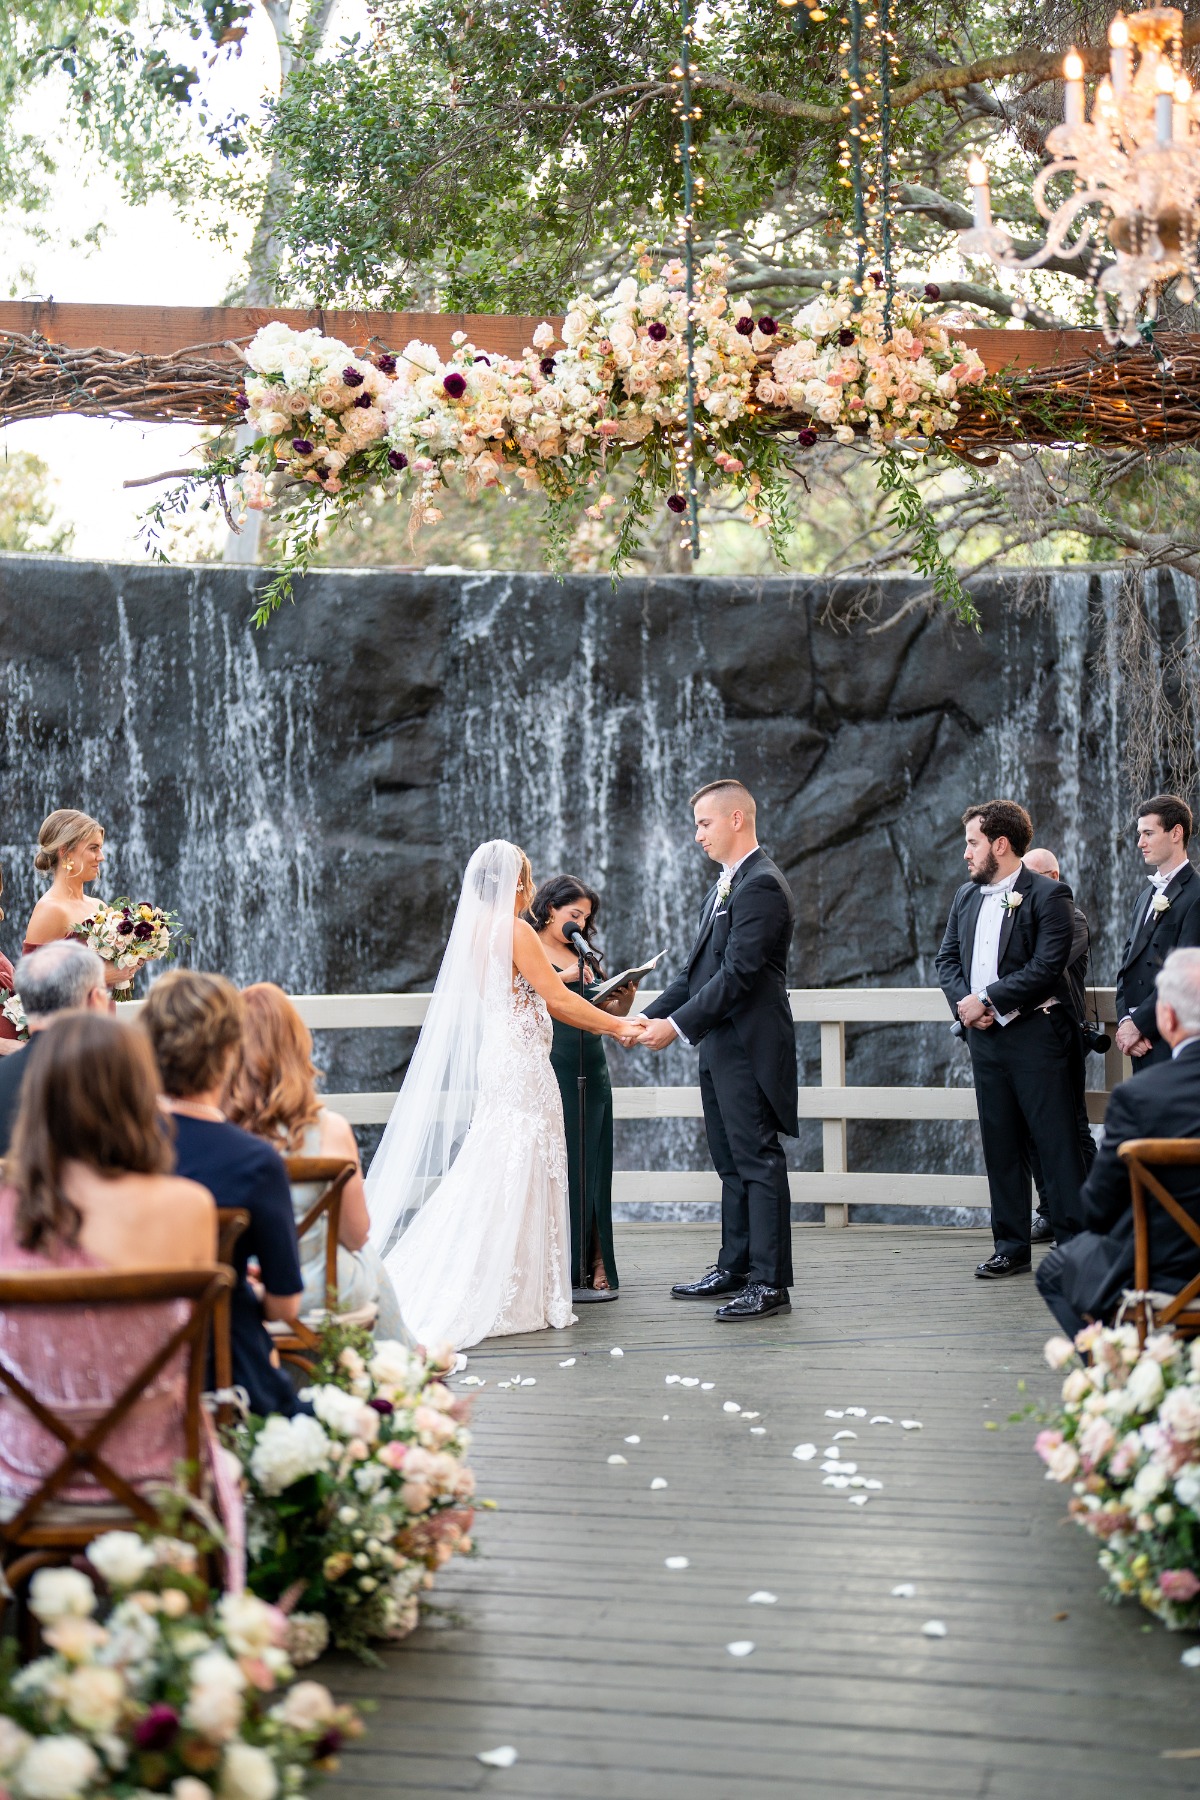 floral arch with waterfall backdrop for outdoor wedding ceremony